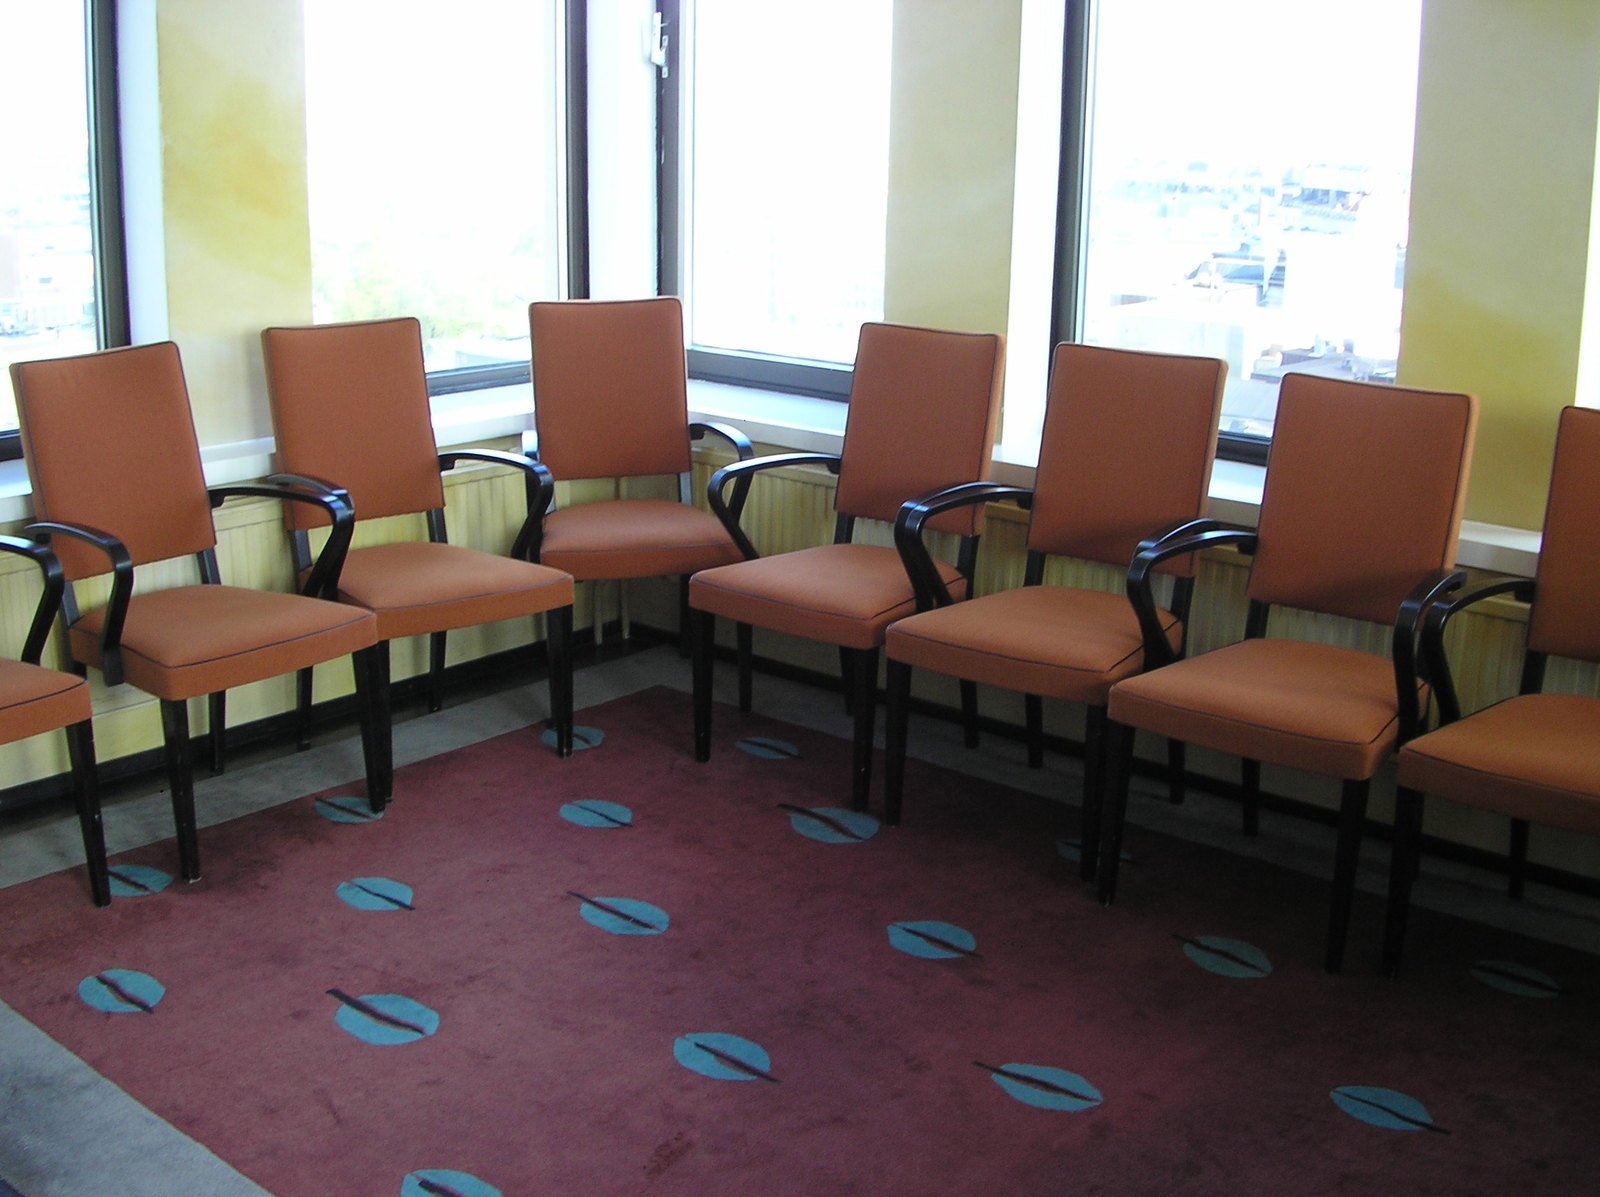 six chairs arranged up facing a large window